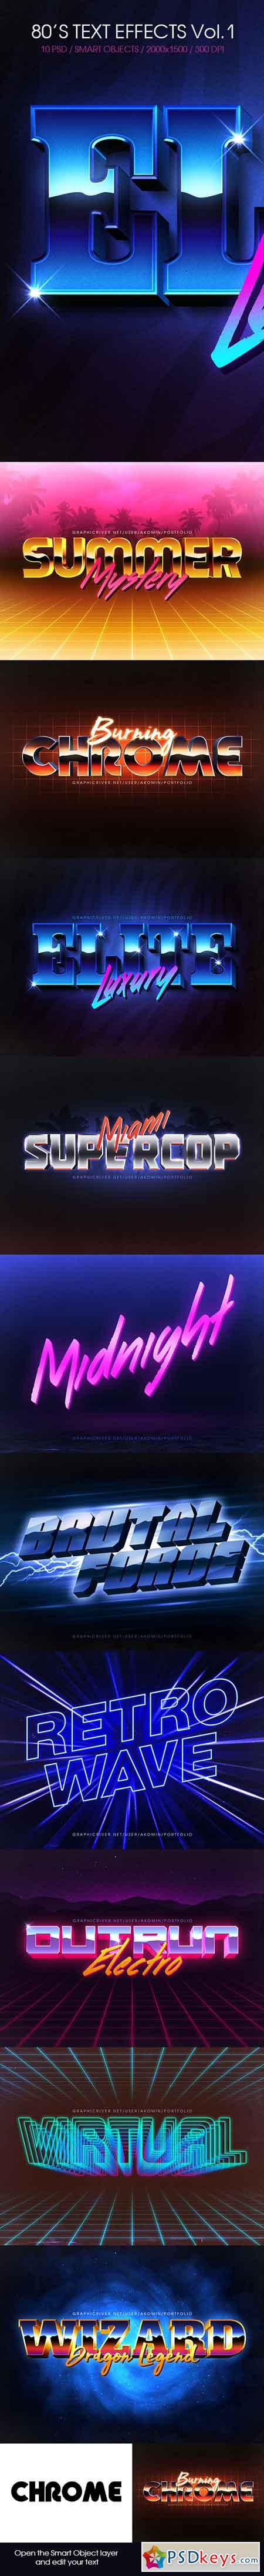 80s Text Effects Vol.1 22583100